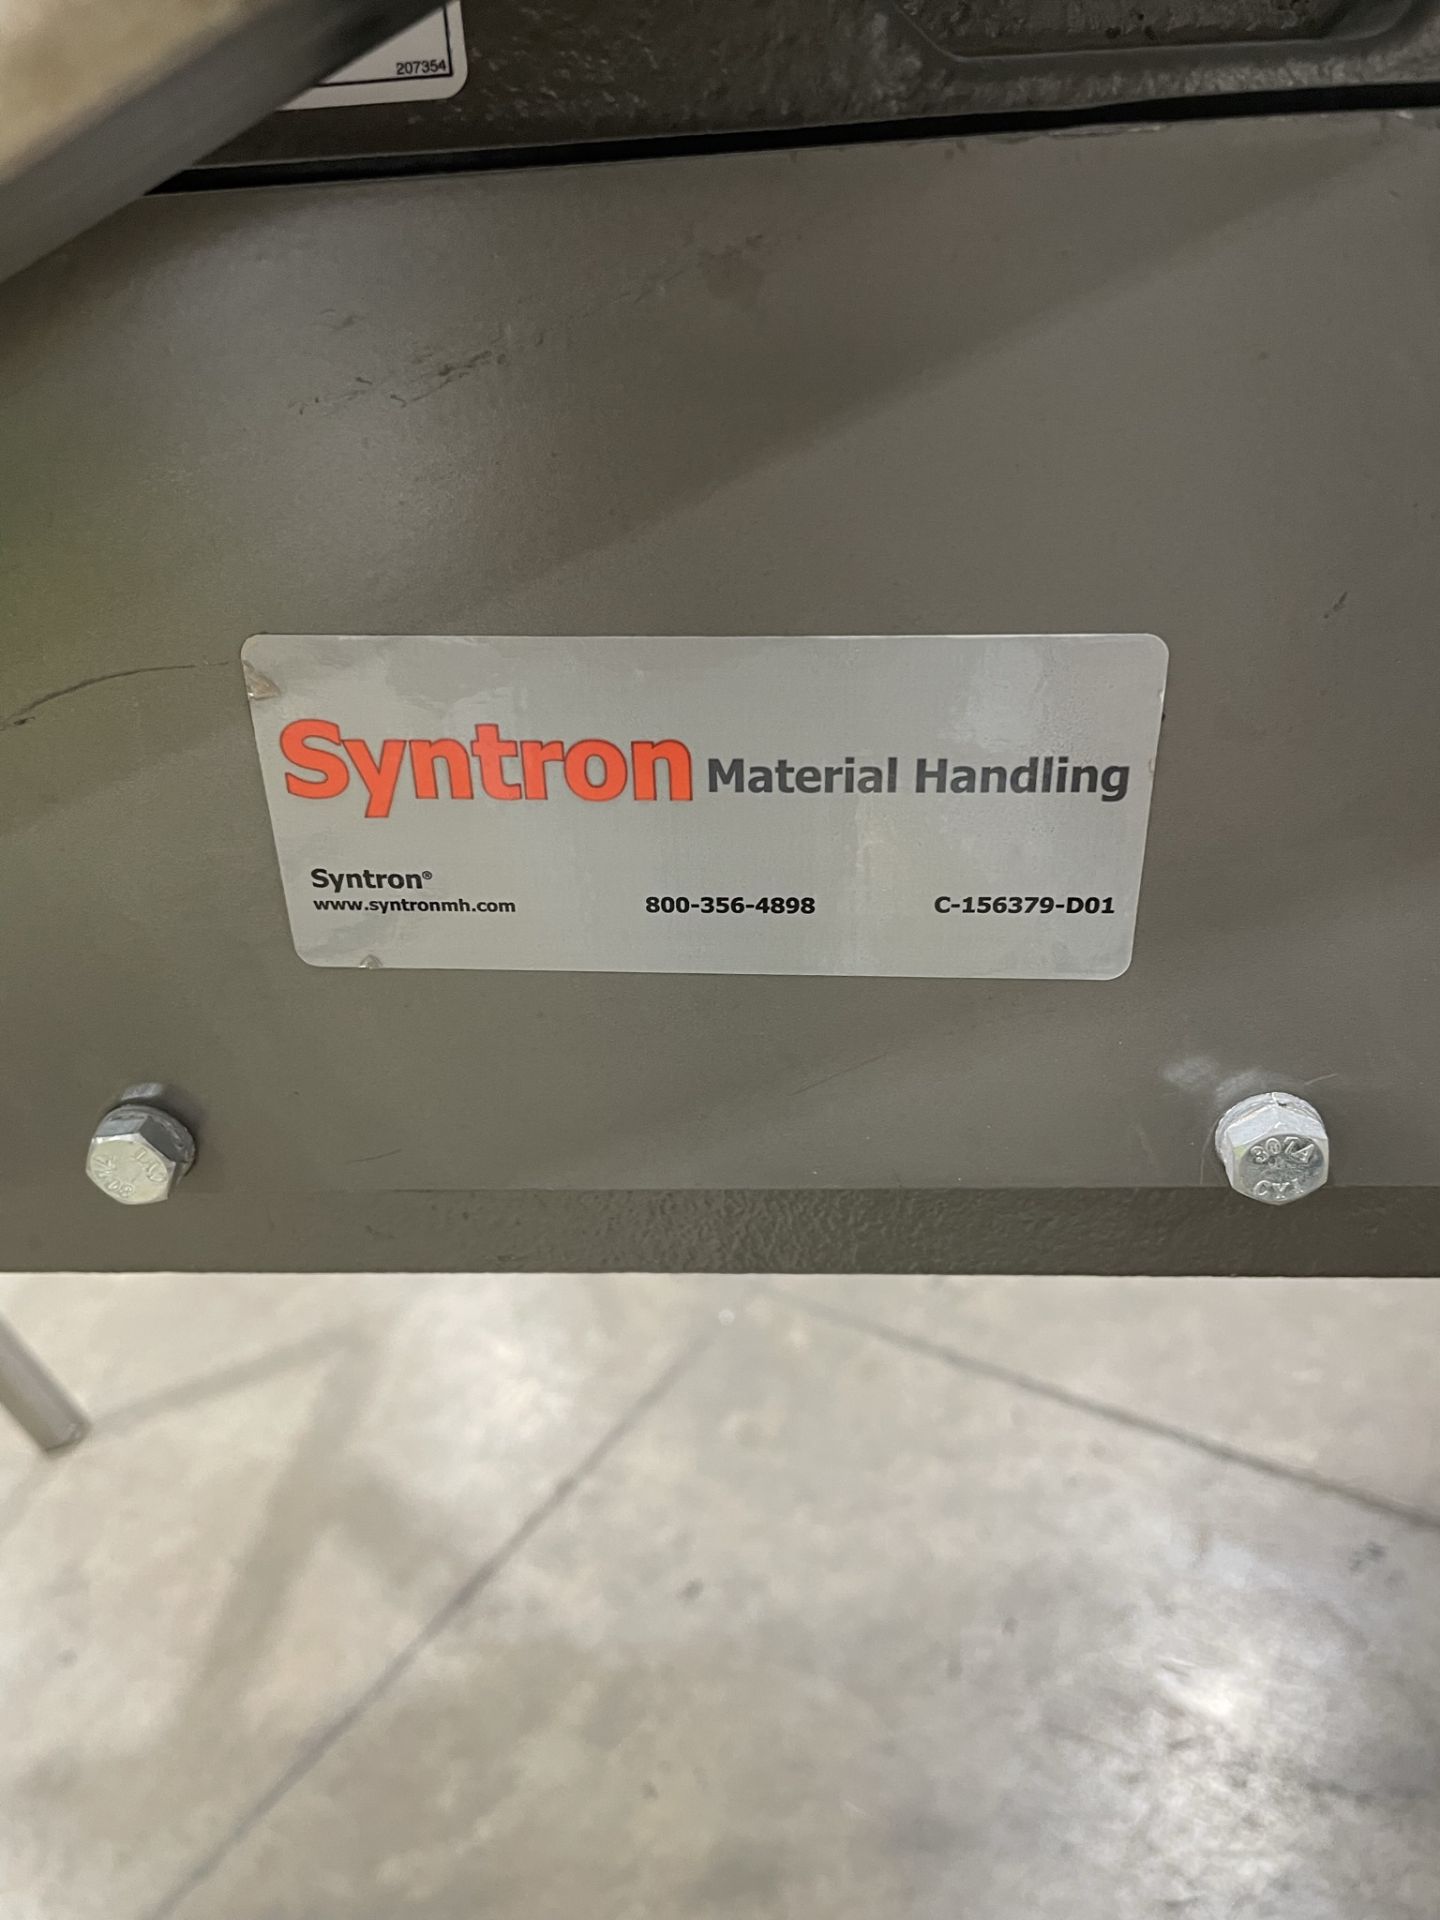 Syntron Stainless Steel Vibratory Feeding Conveyor,Model#FH24-C, serial#T106497 order#T222905, 445 - Image 4 of 6